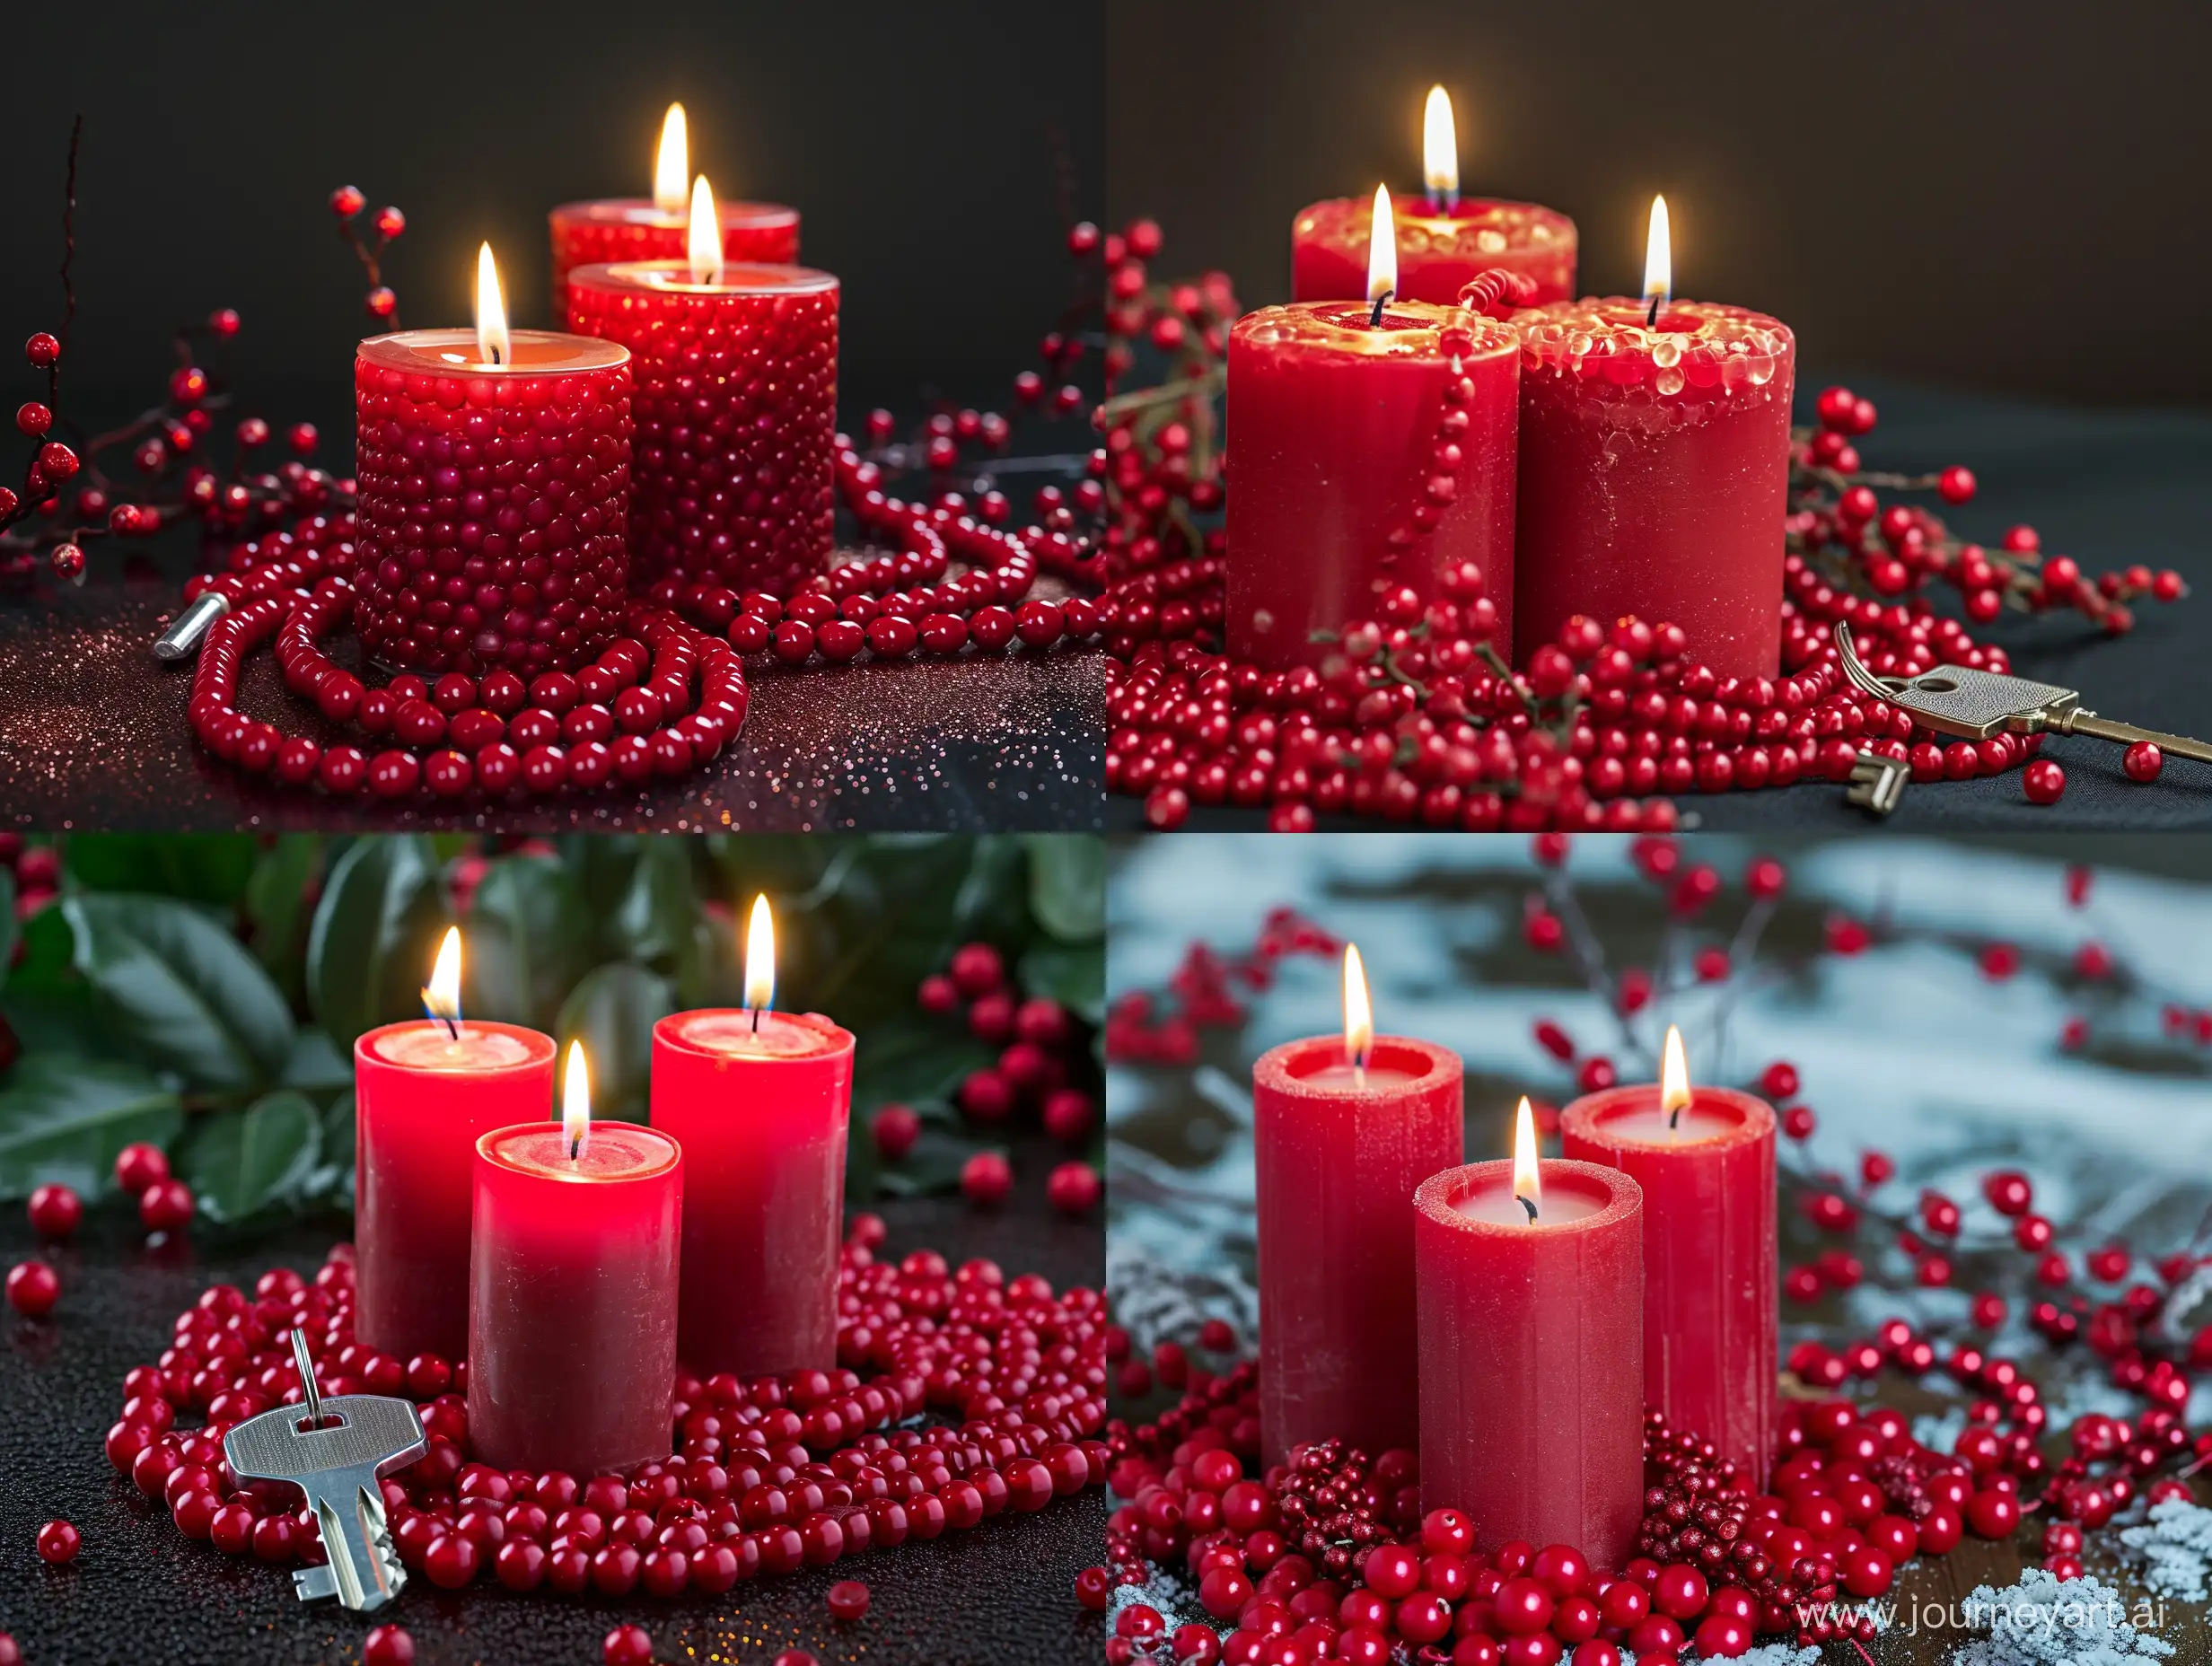 Vibrant-Red-Candlelight-with-Beads-and-Key-in-Water